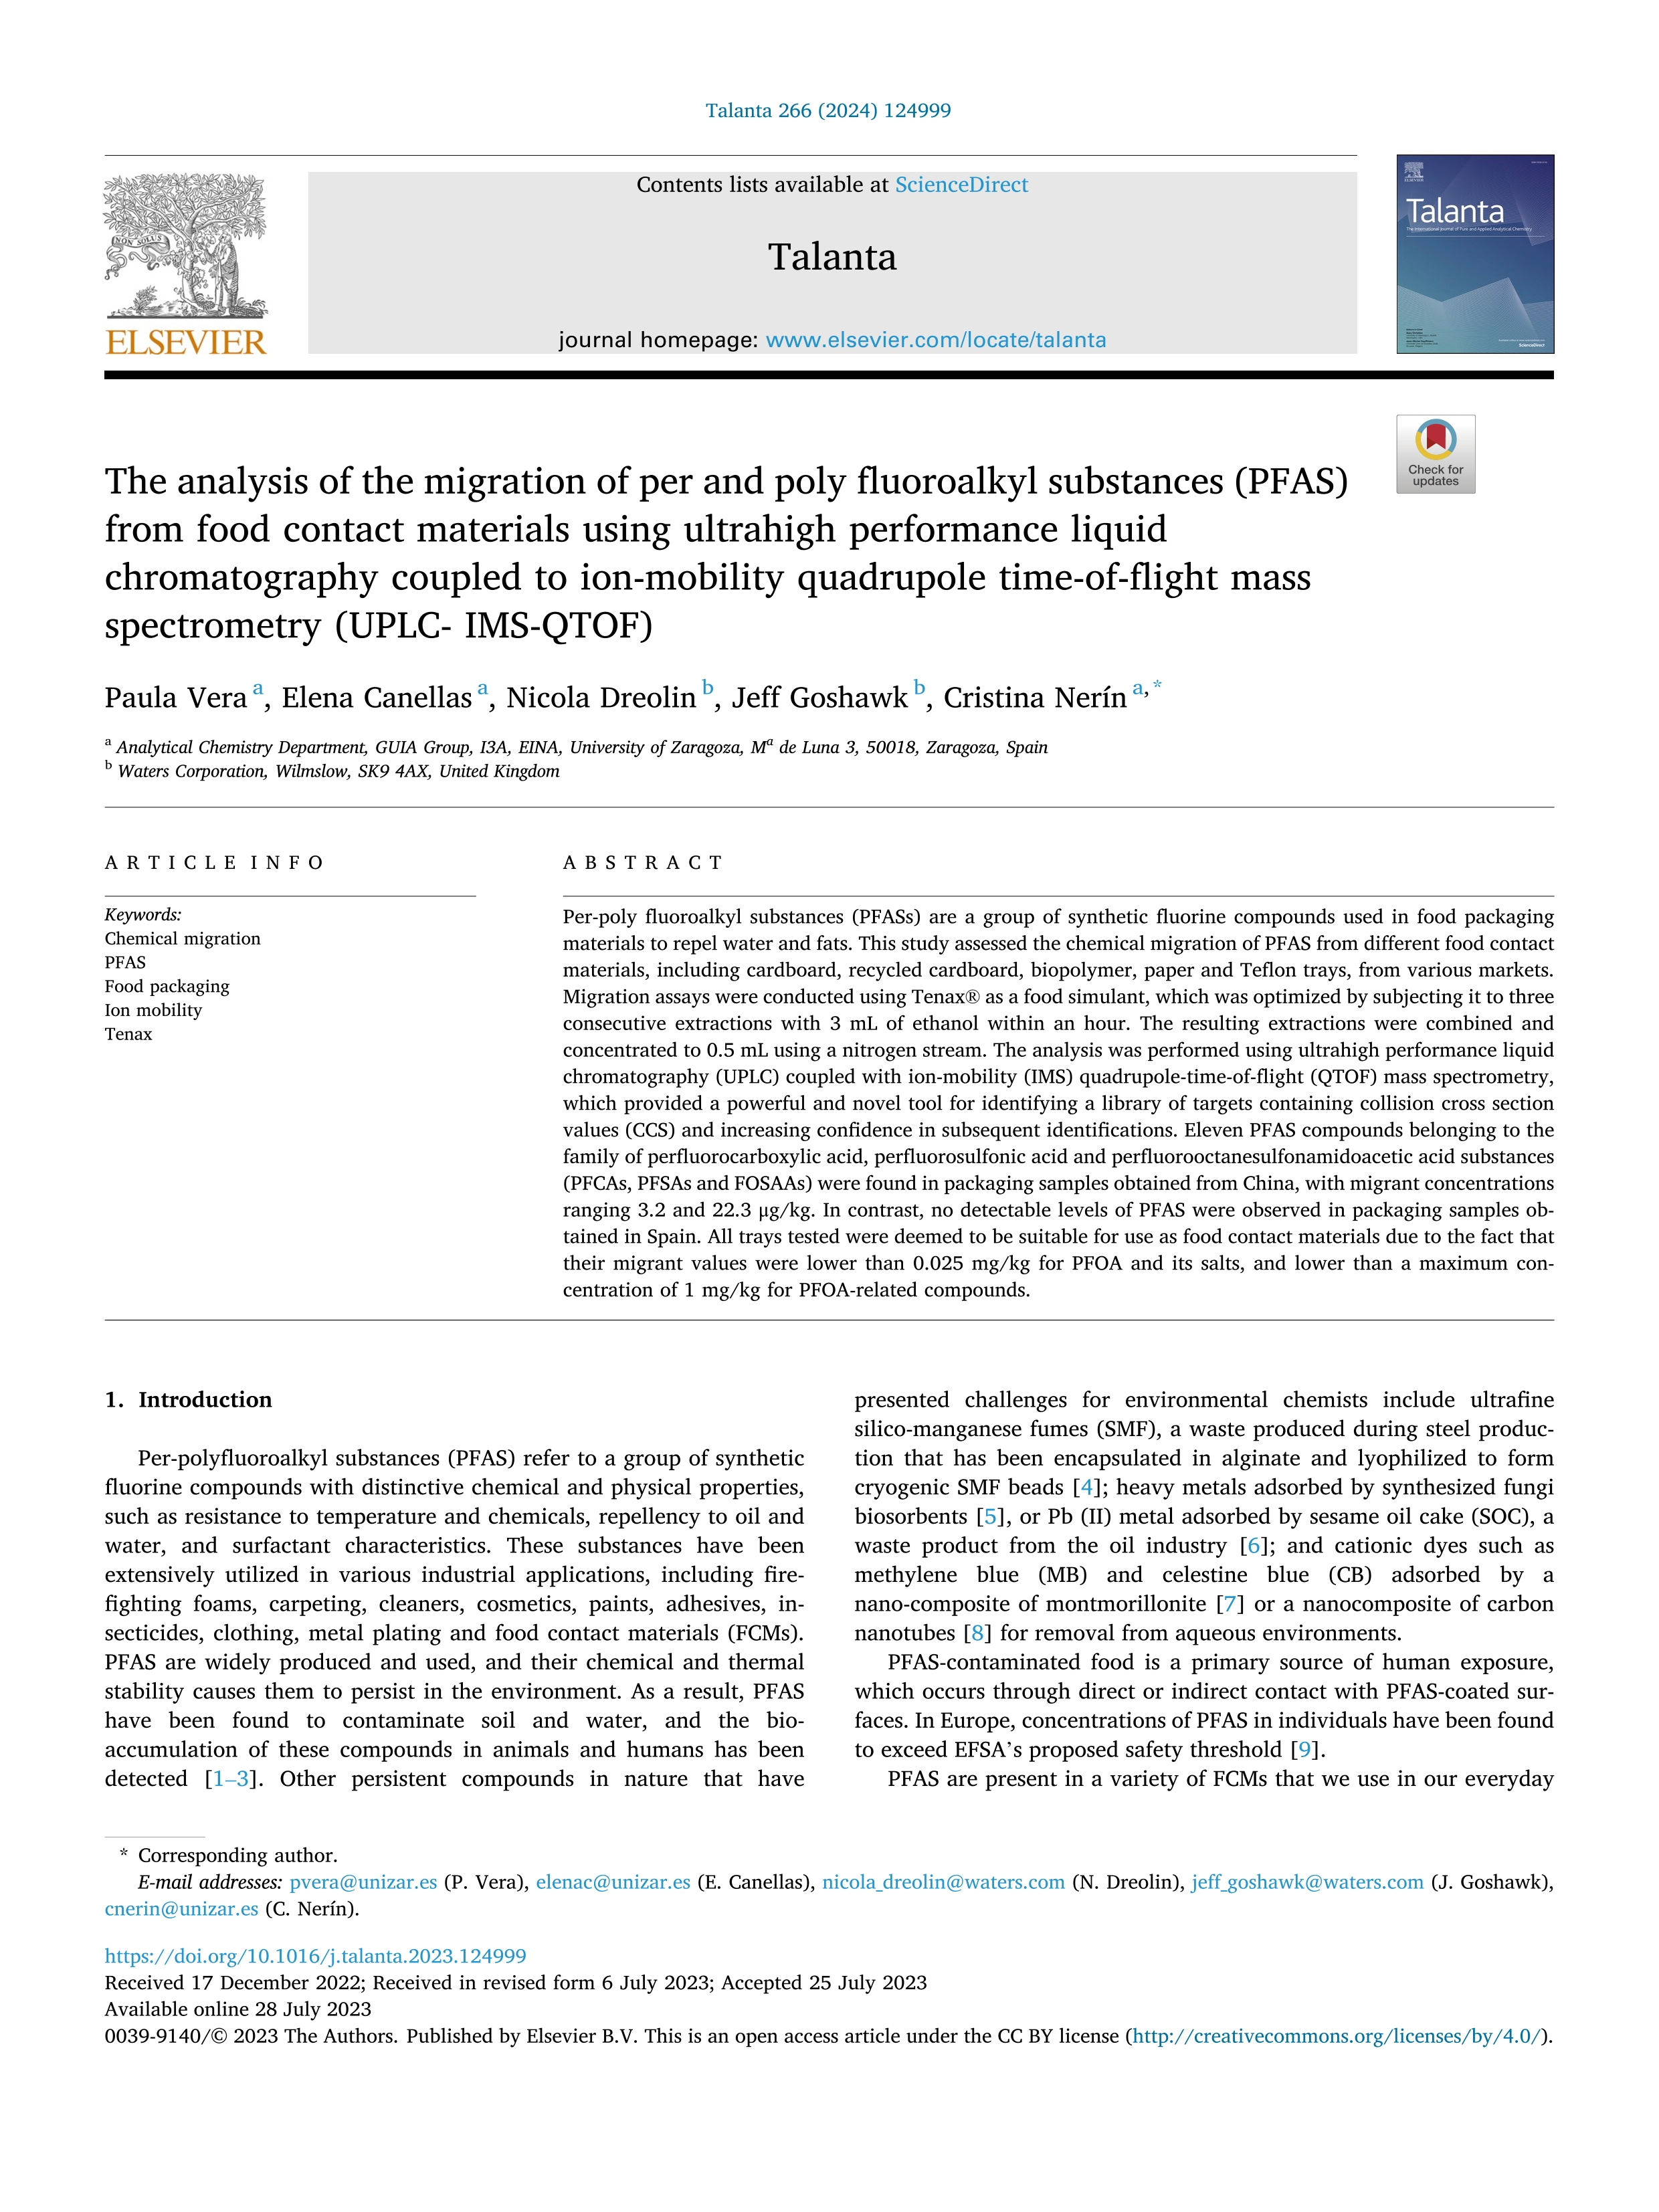 The analysis of the migration of per and poly fluoroalkyl substances (PFAS) from food contact materials using ultrahigh performance liquid chromatography coupled to ion-mobility quadrupole time-of-flight mass spectrometry (UPLC- IMS-QTOF)